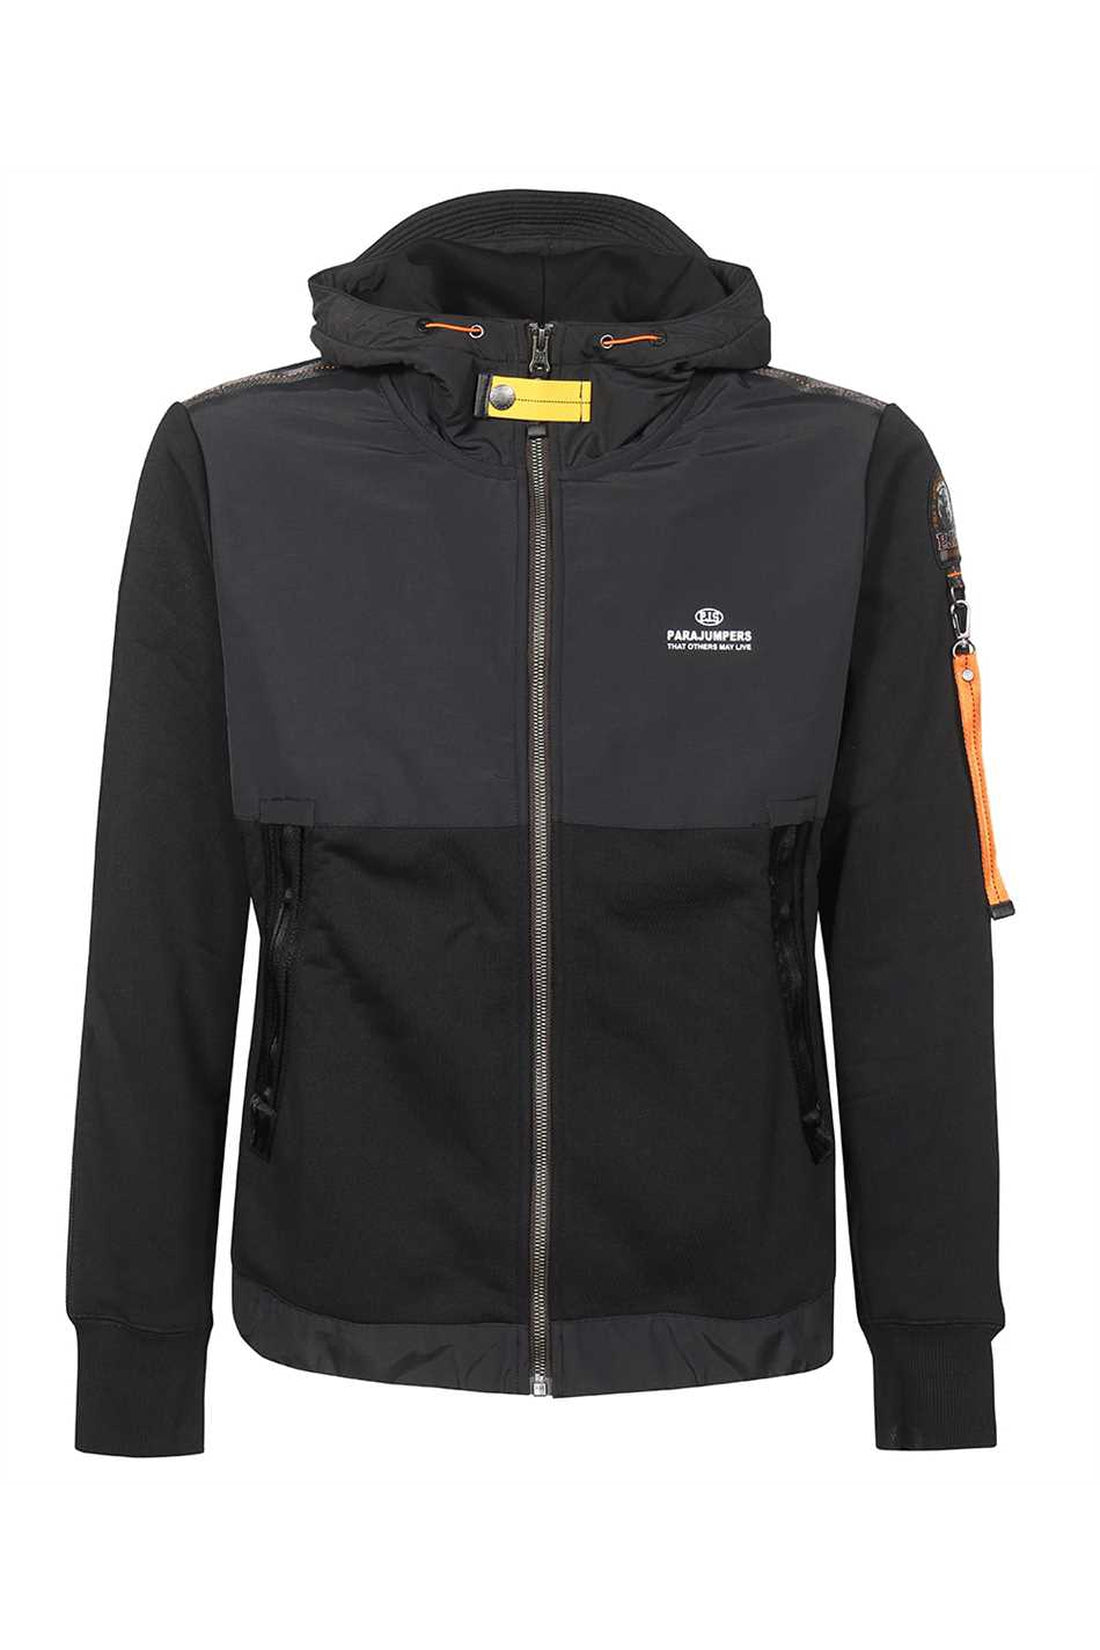 Parajumpers-OUTLET-SALE-Full zip hoodie-ARCHIVIST